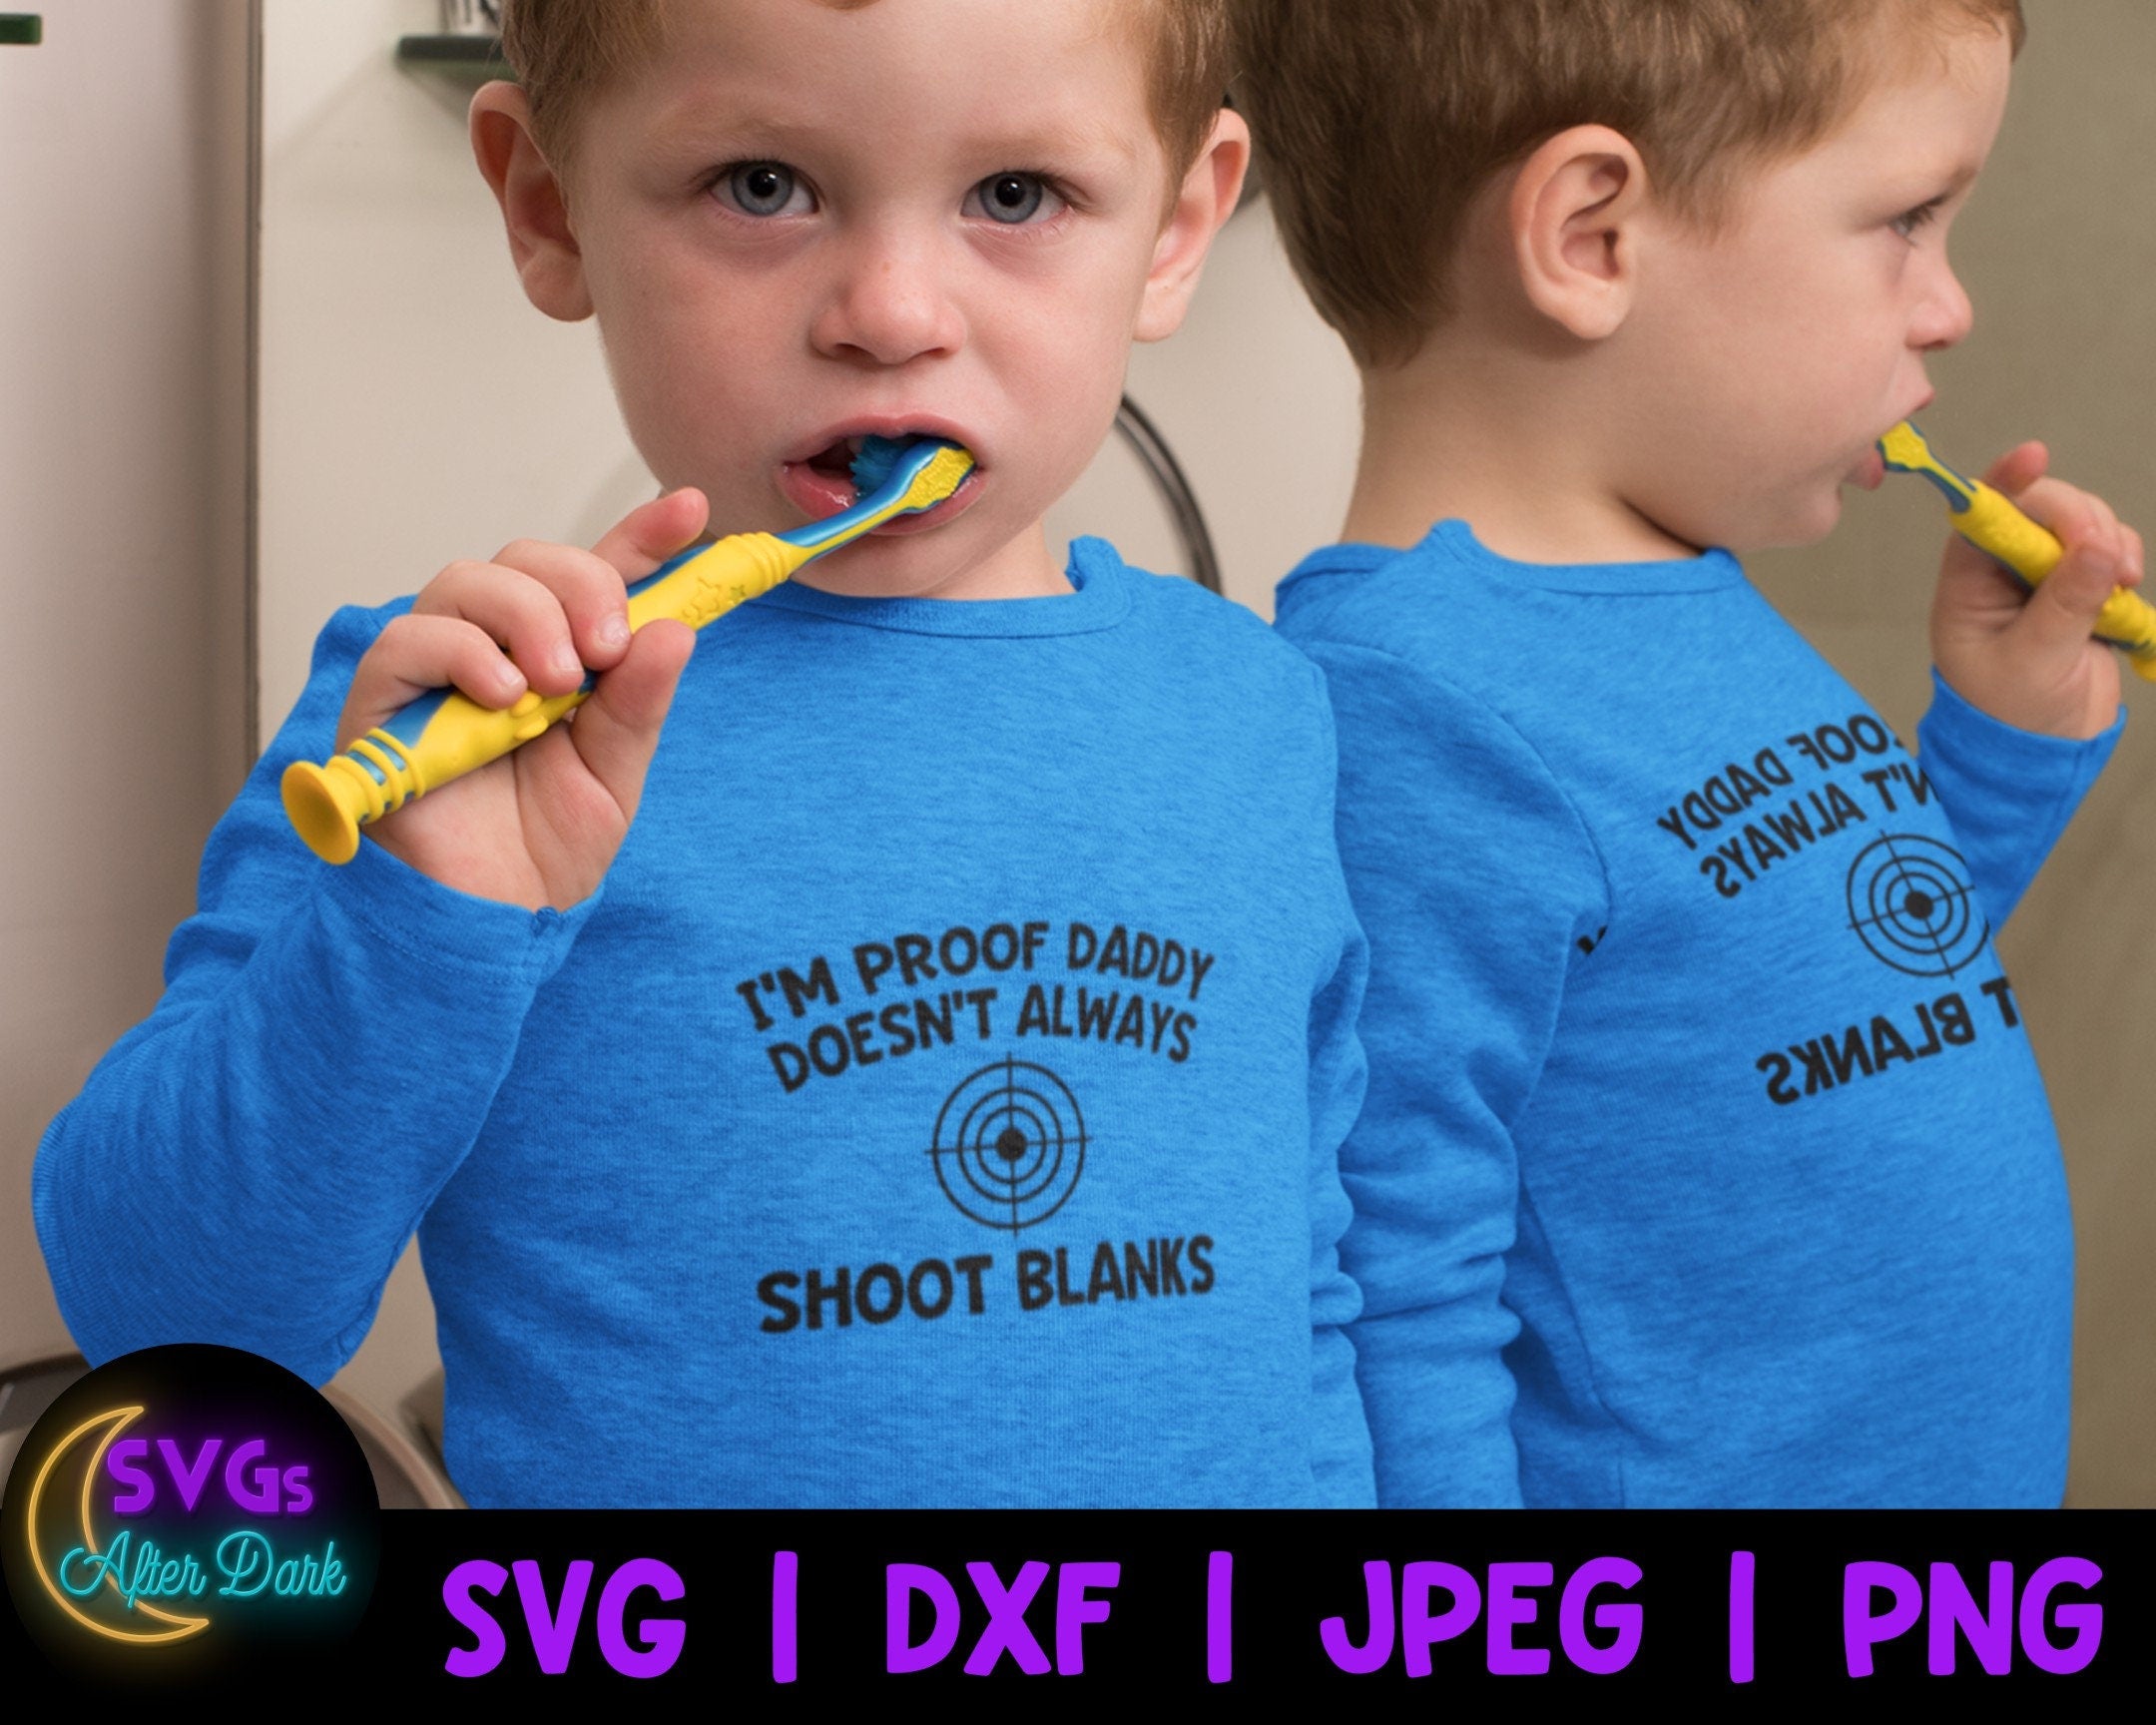 NSFW SVG - I'm Proof Daddy doesn't Always Shoot Blanks SVG - Adult Humor Baby Bodysuit